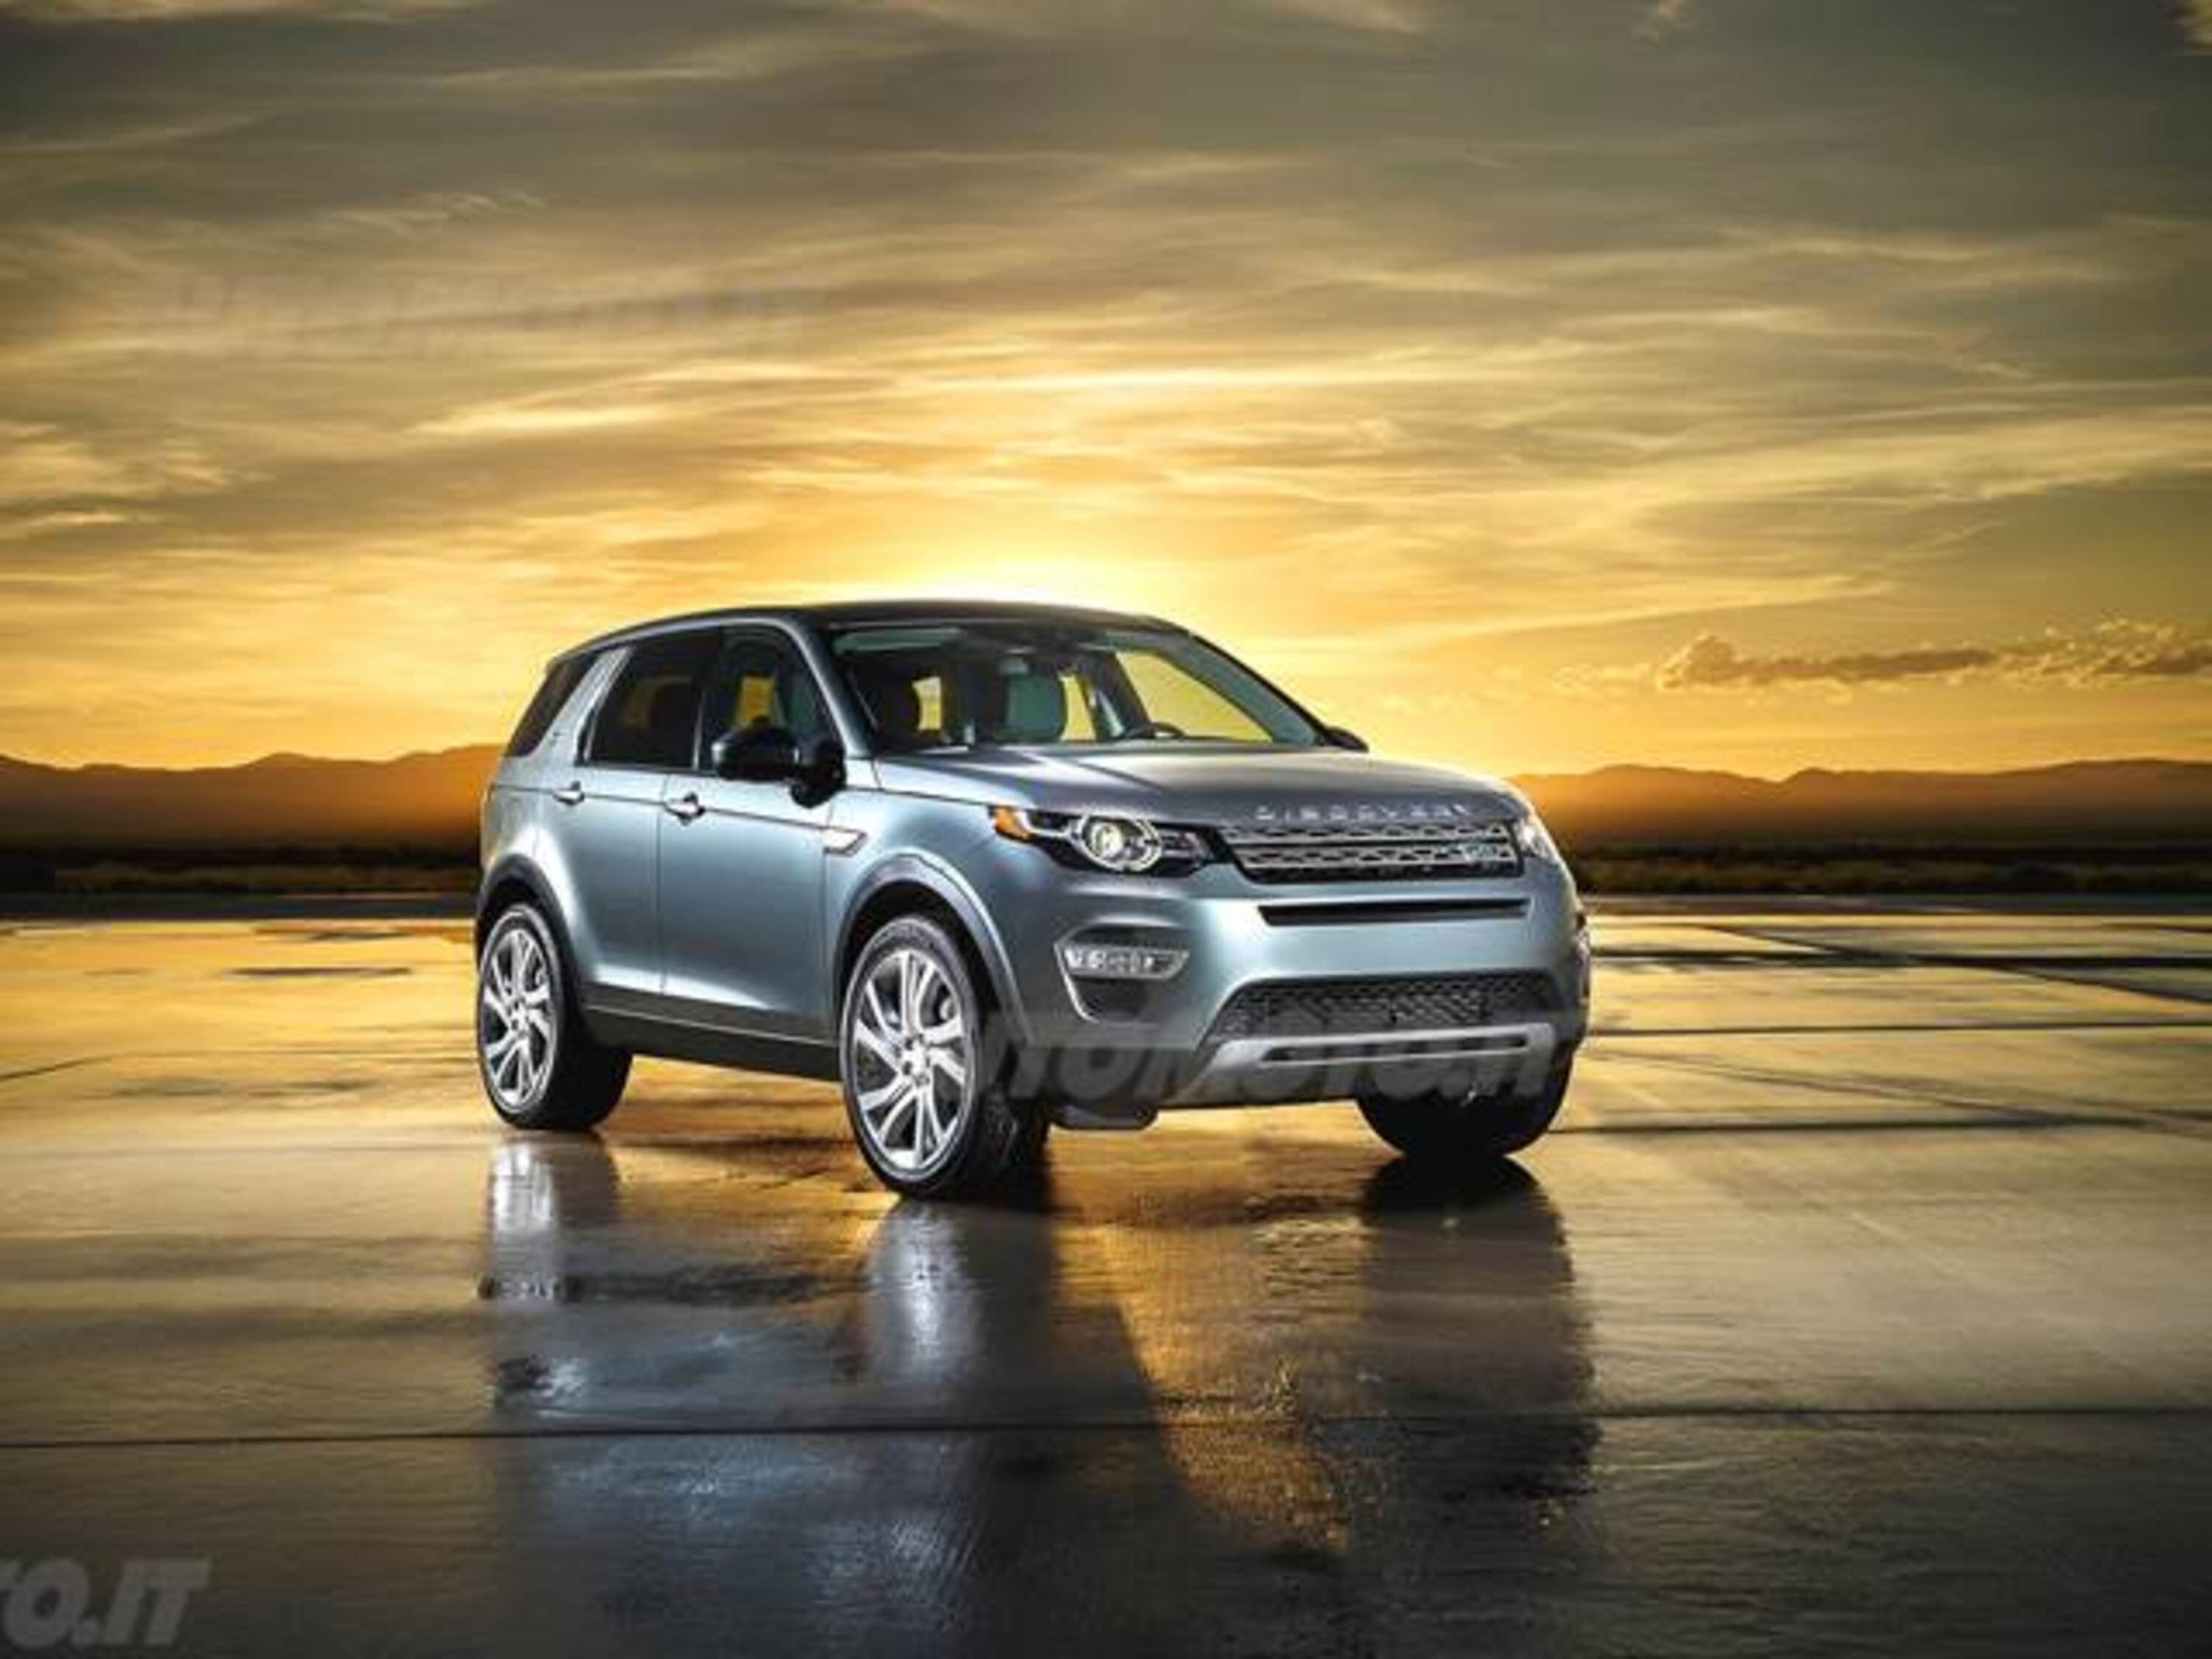 Land Rover Discovery Sport 2.2 TD4 SE